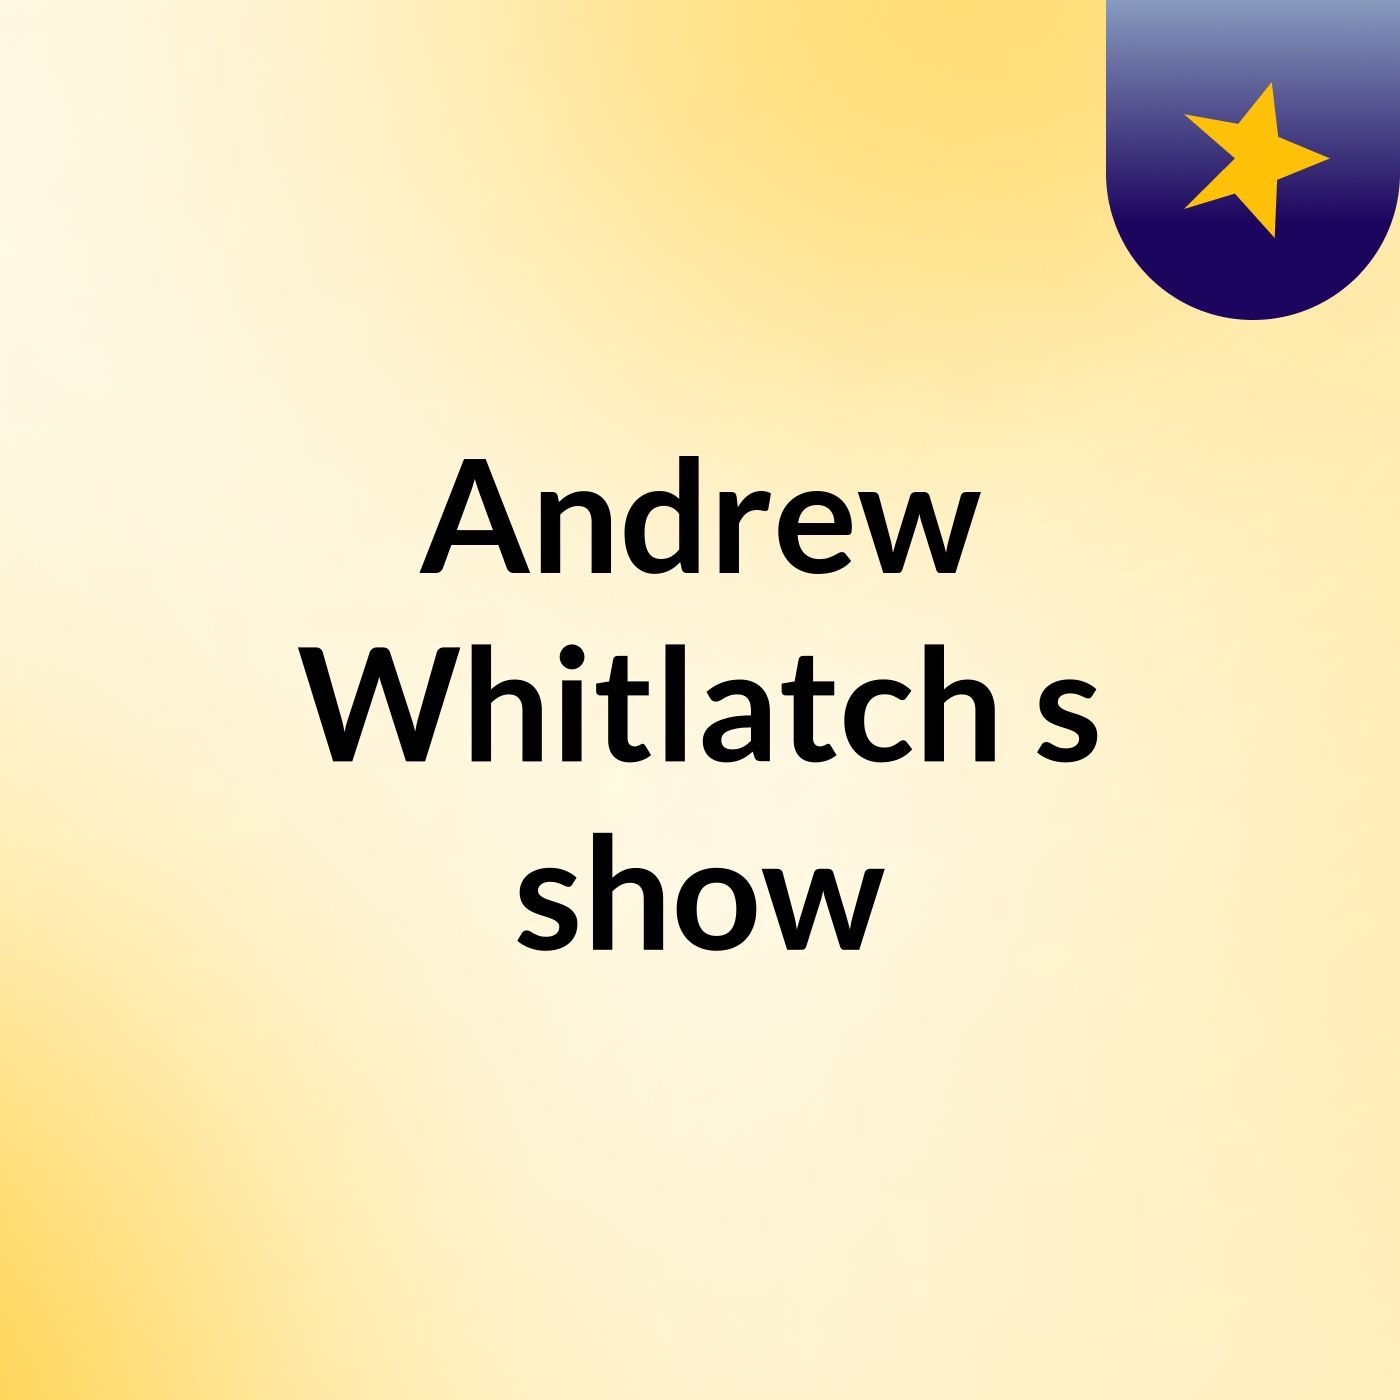 Andrew Whitlatch's show